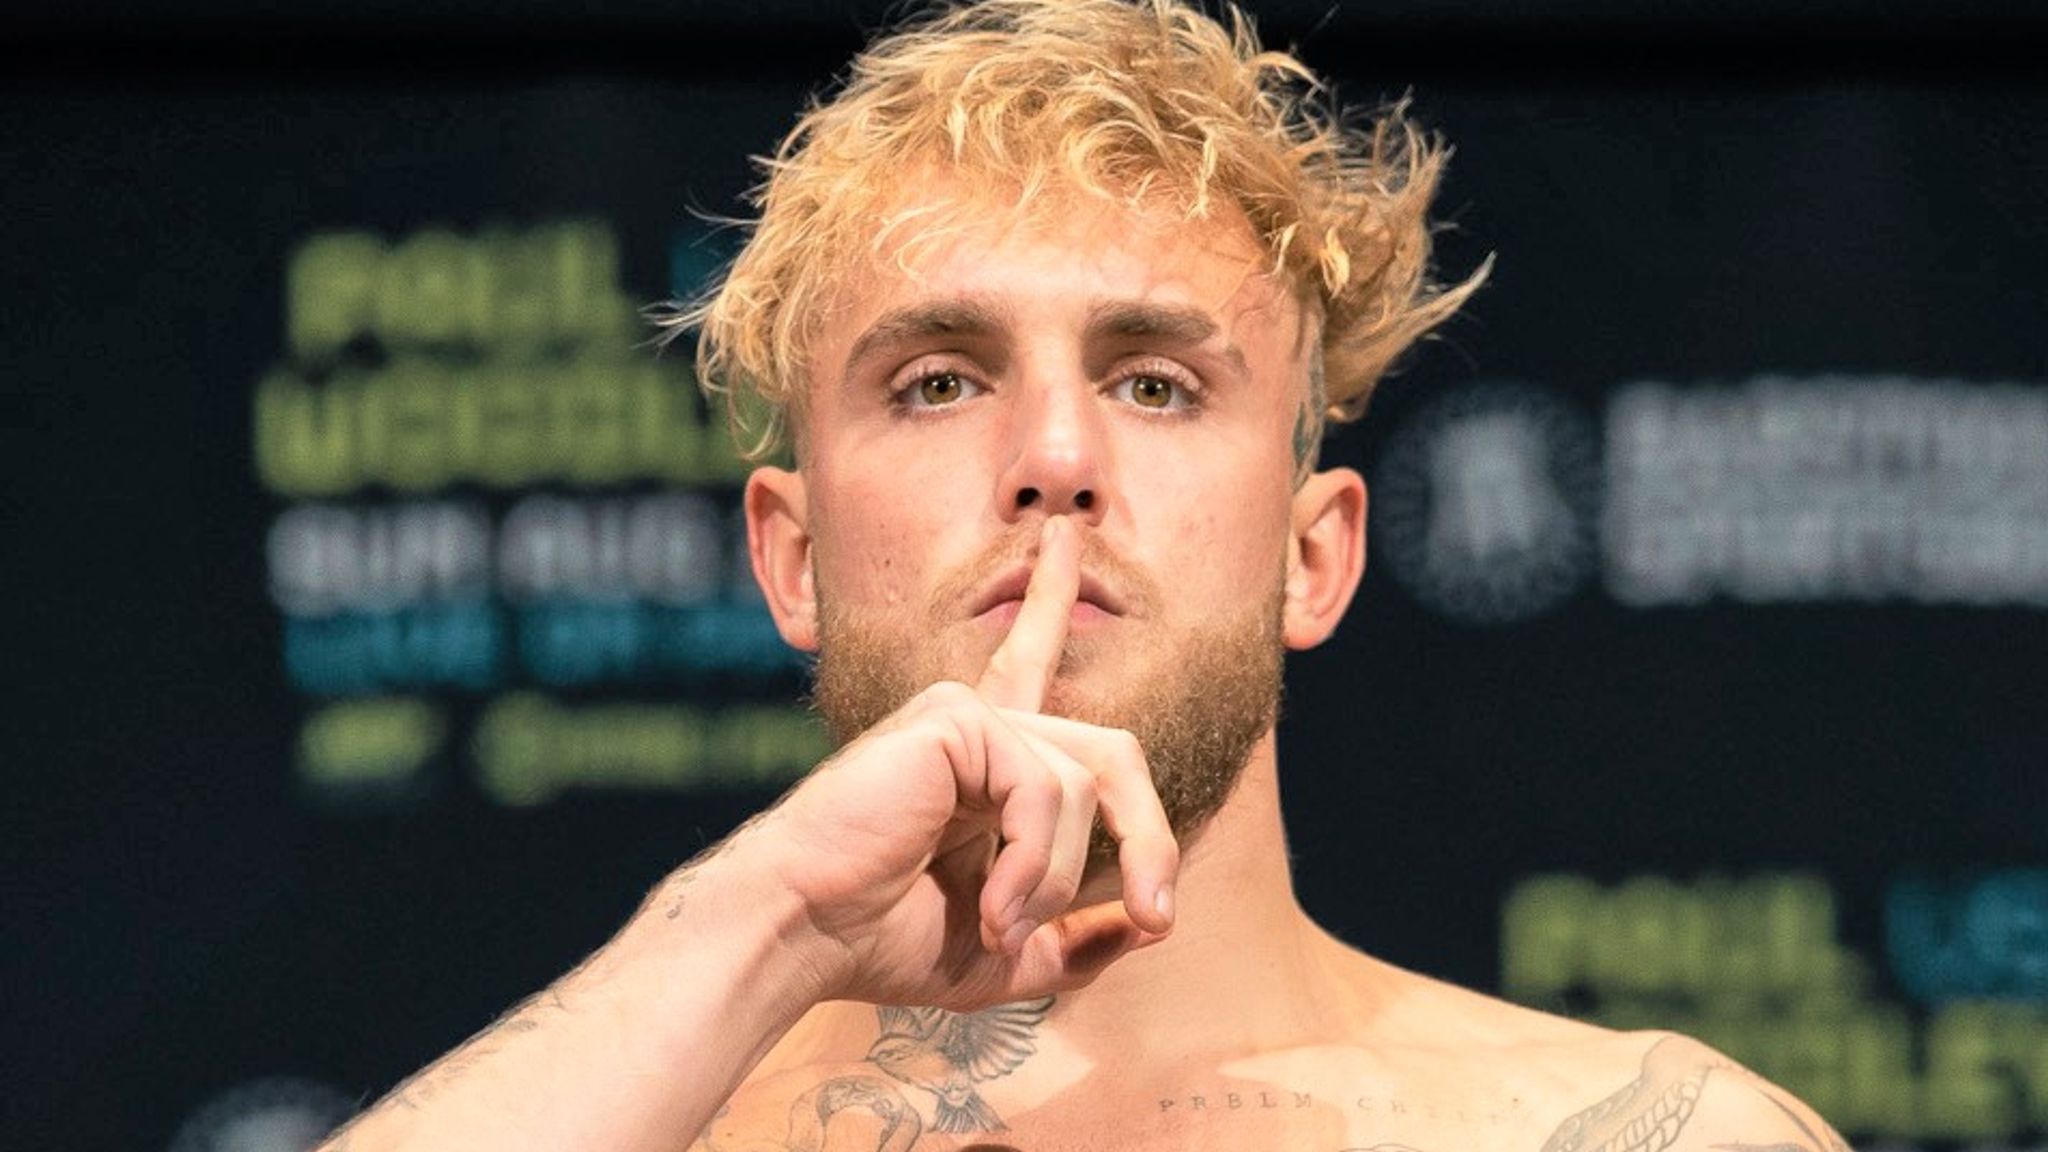 “He got the light:” Mike Tyson’s Vision Holds Jake Paul As The Savior ...